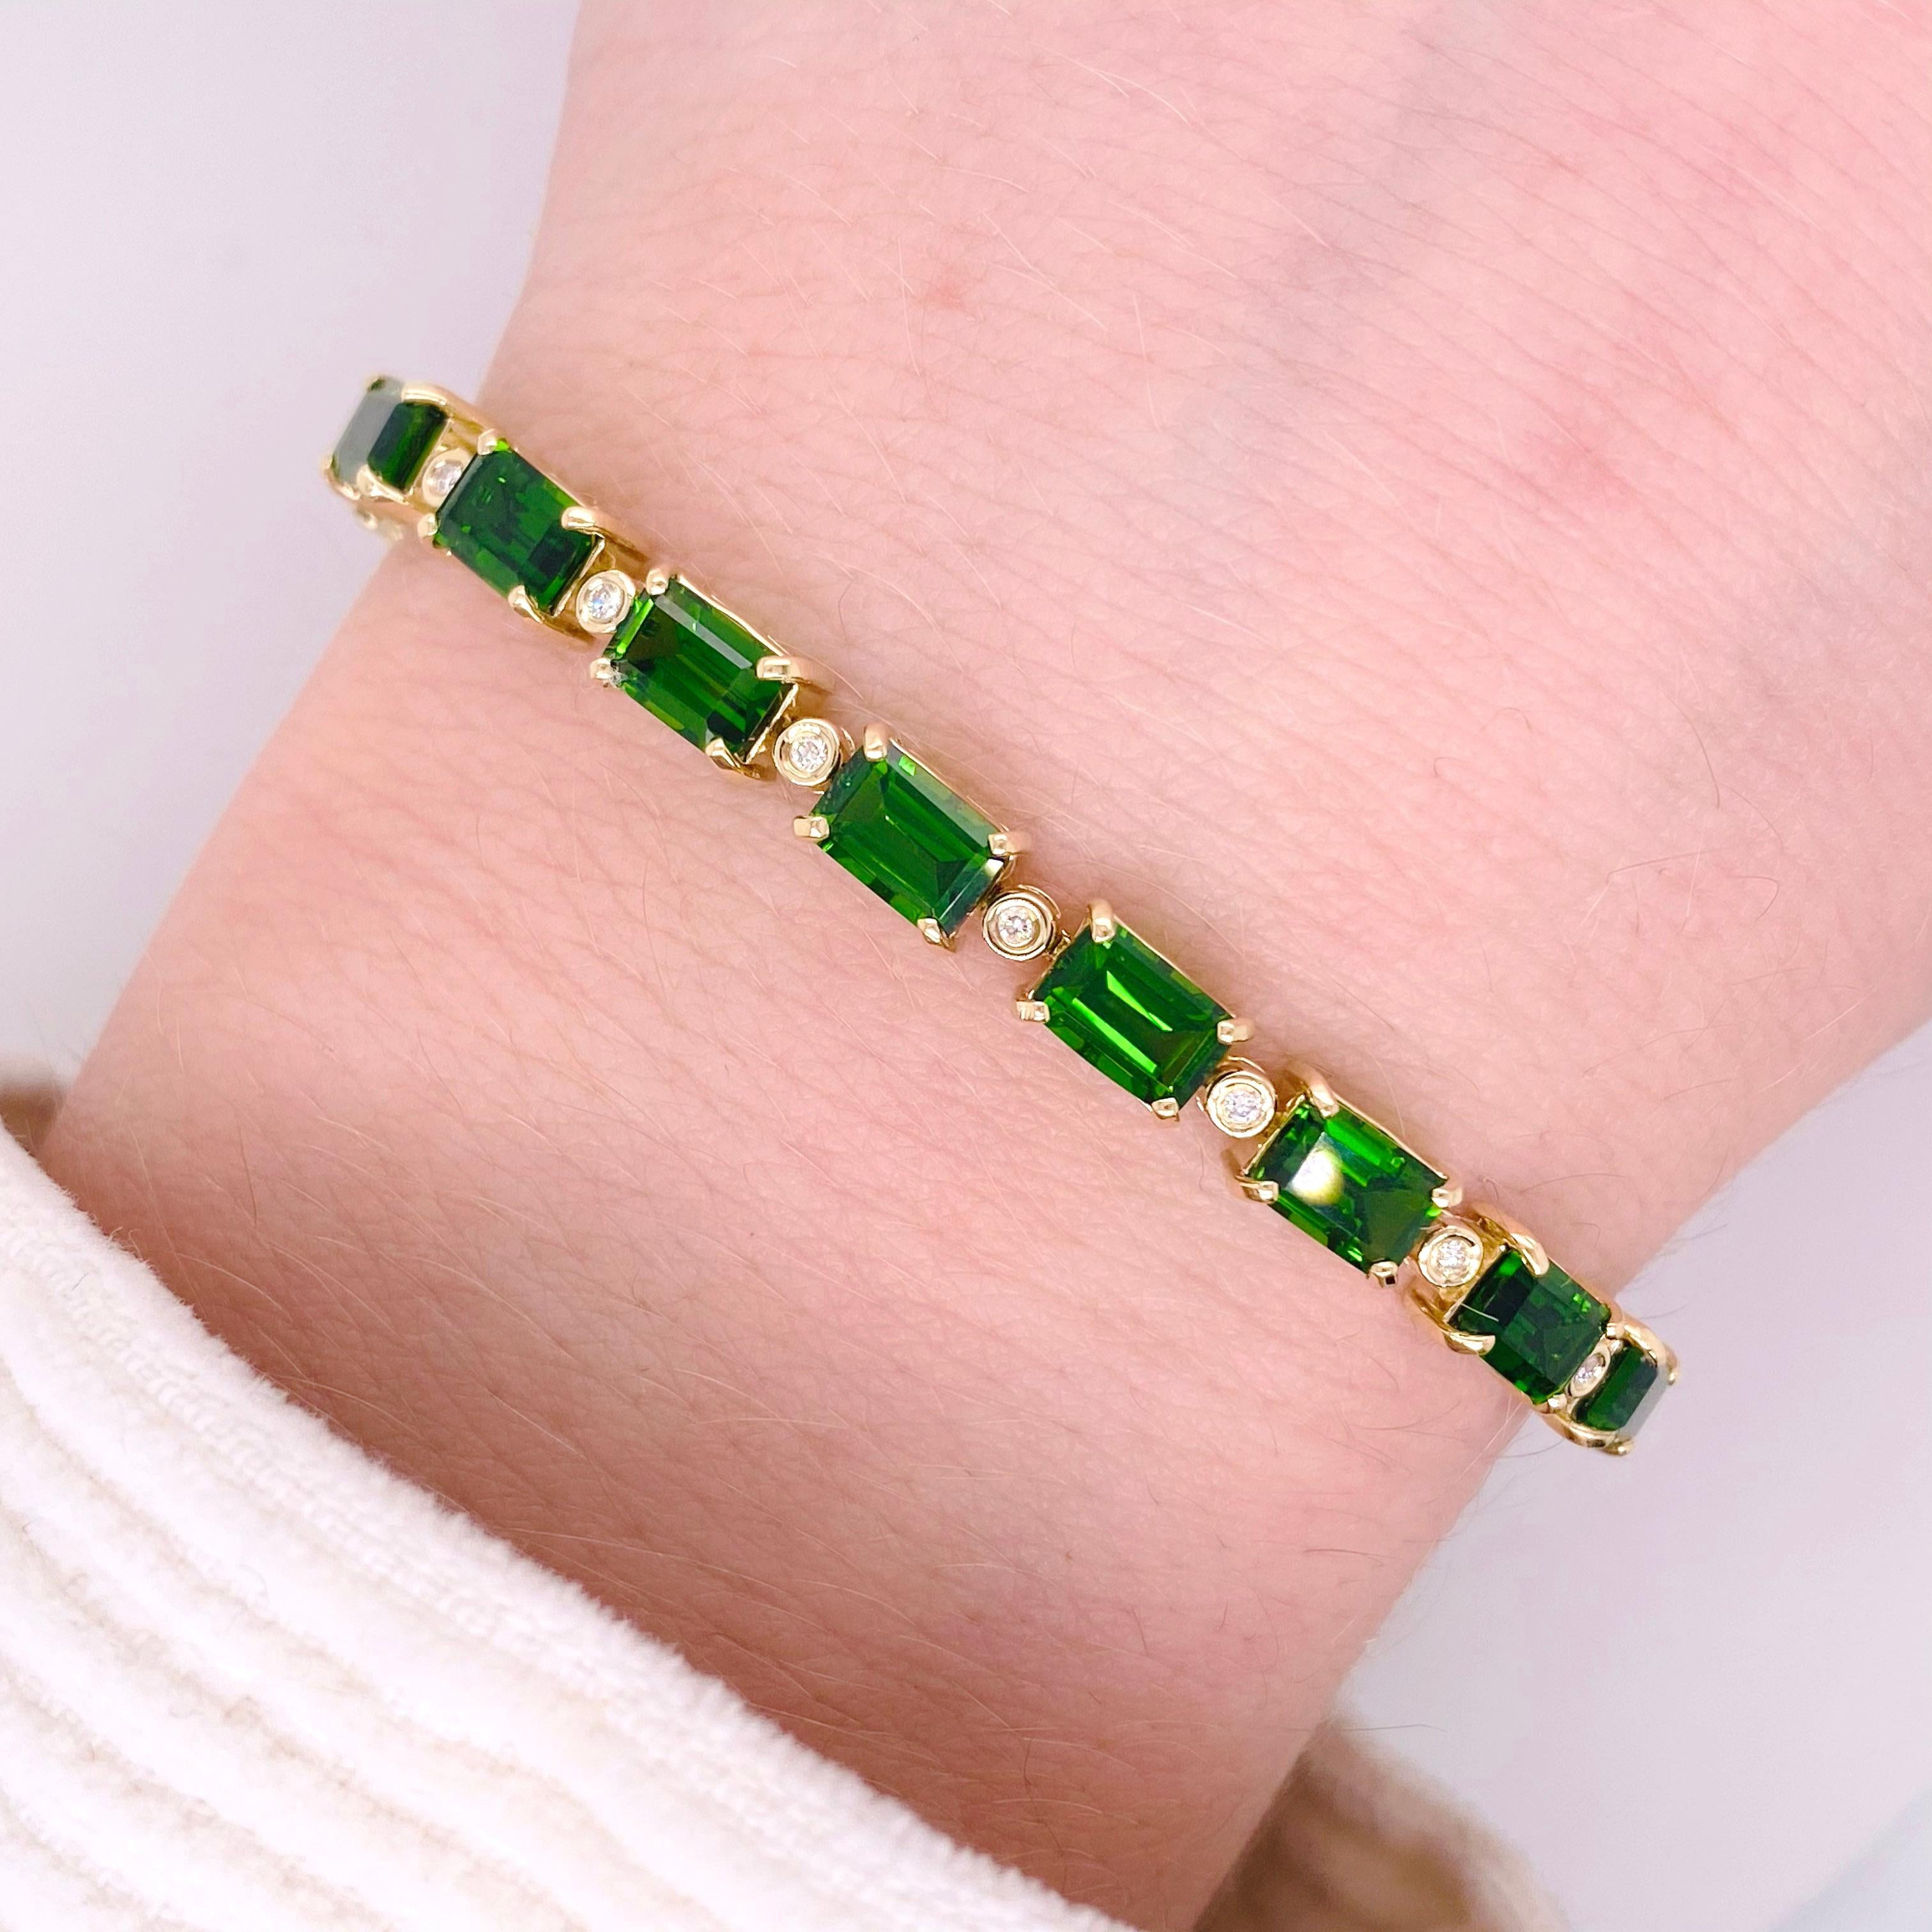 Rare and Precious. Discovered in 1988 deep in the Siberian Mountains and mined only four months per year, Emerald is one of the newest, most exciting gemstones. An all natural untreated gem of unique beauty. Emerald has earned the distinction as an